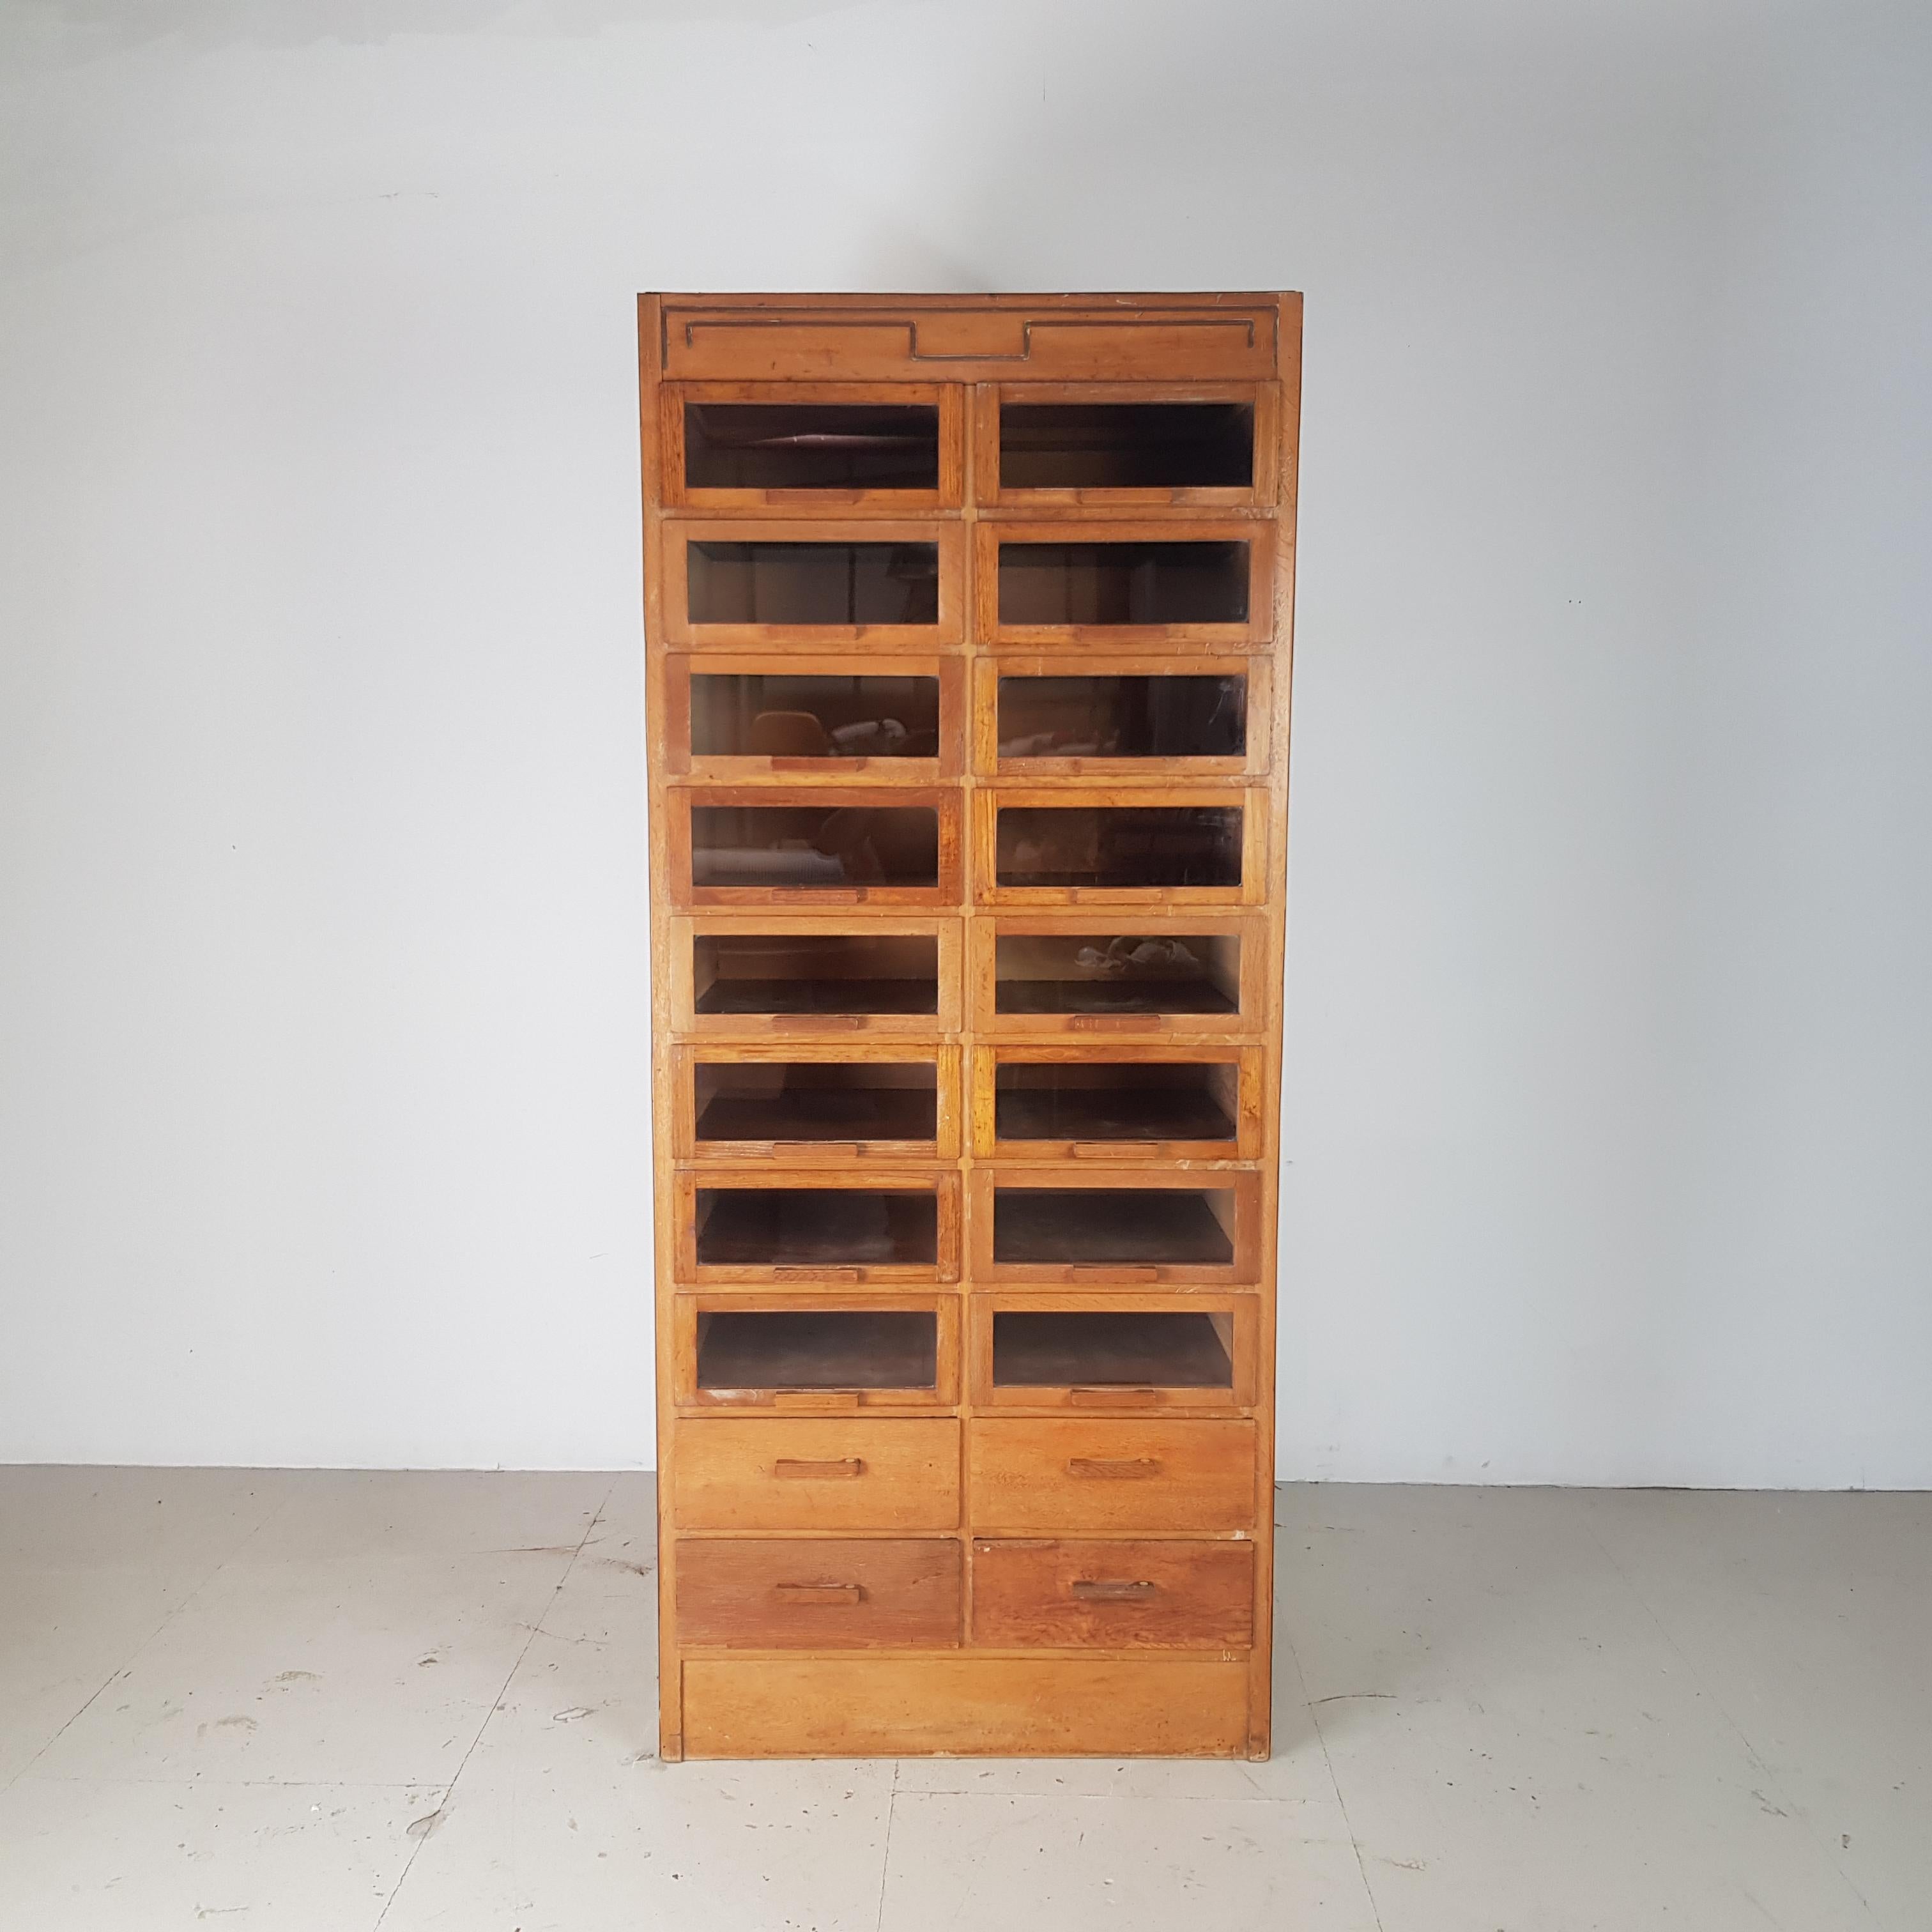 Really lovely vintage 20-drawer haberdashery shop cabinet from the 1940s-1950s with wooden handles. Made by Dudley & Co.
With 16 glass fronted drawers and 4 solid fronted drawers.

In good vintage condition. Some scuffs here and there,